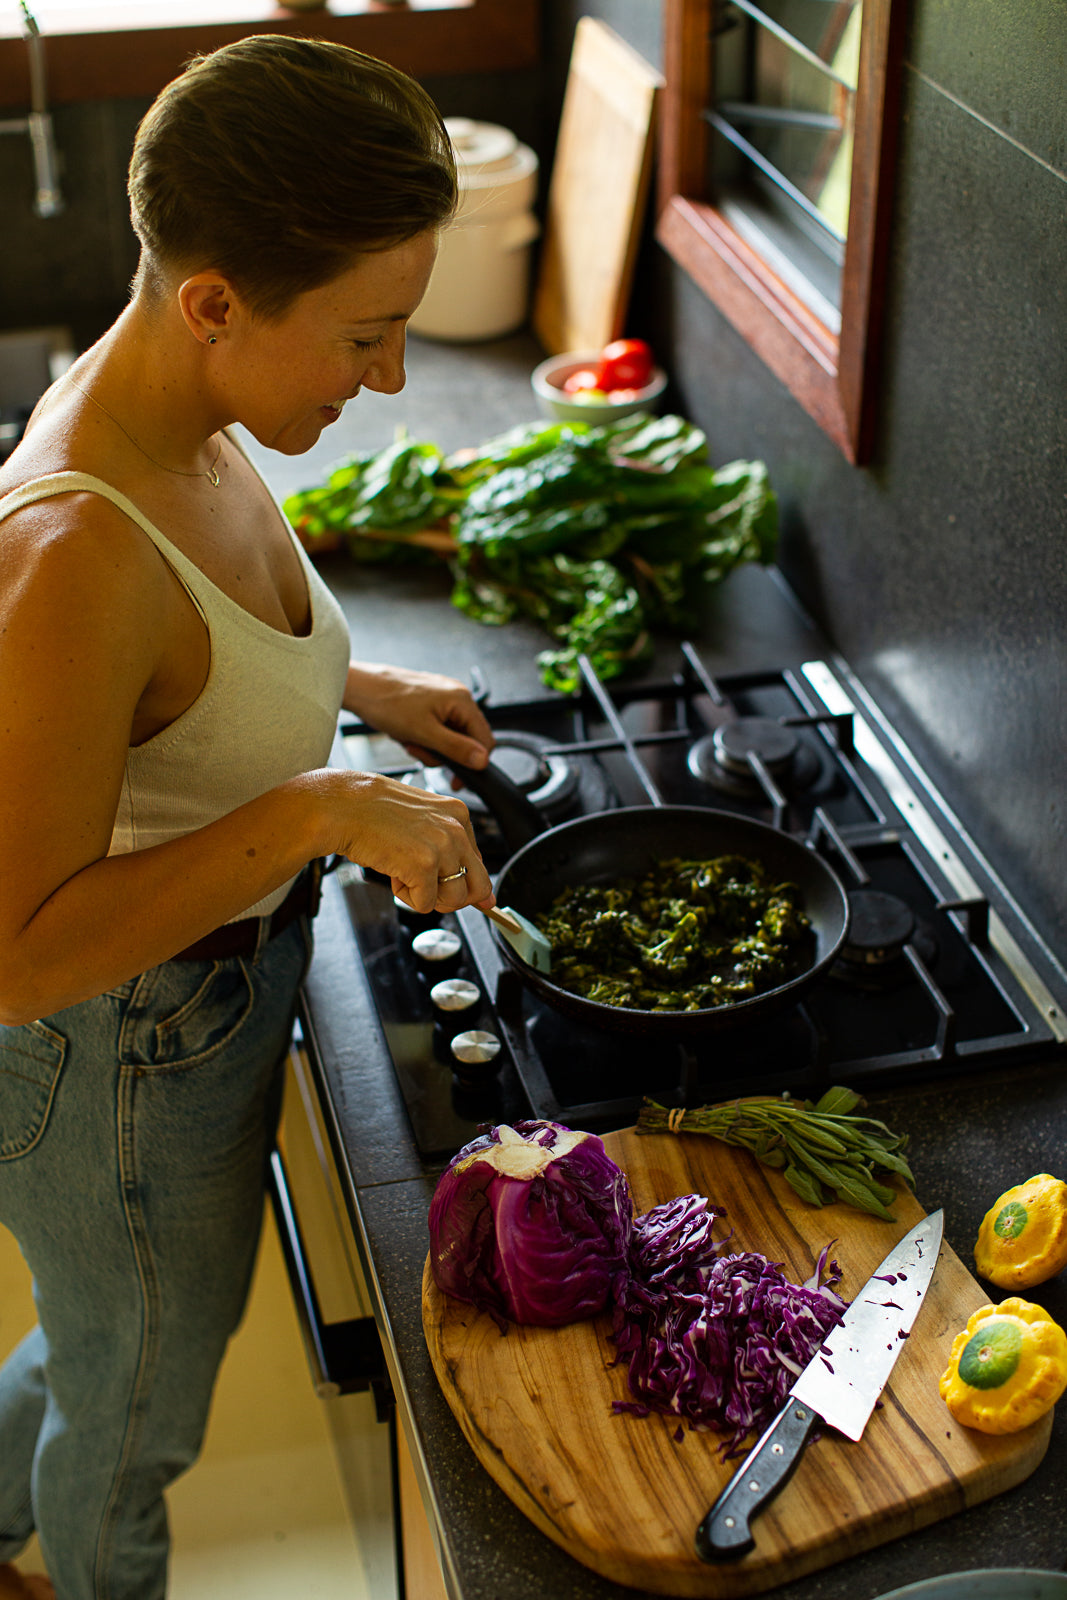 Jadine Hanys, an australian based professional nutritionist making a healthy meal full of nutritious ingredients.